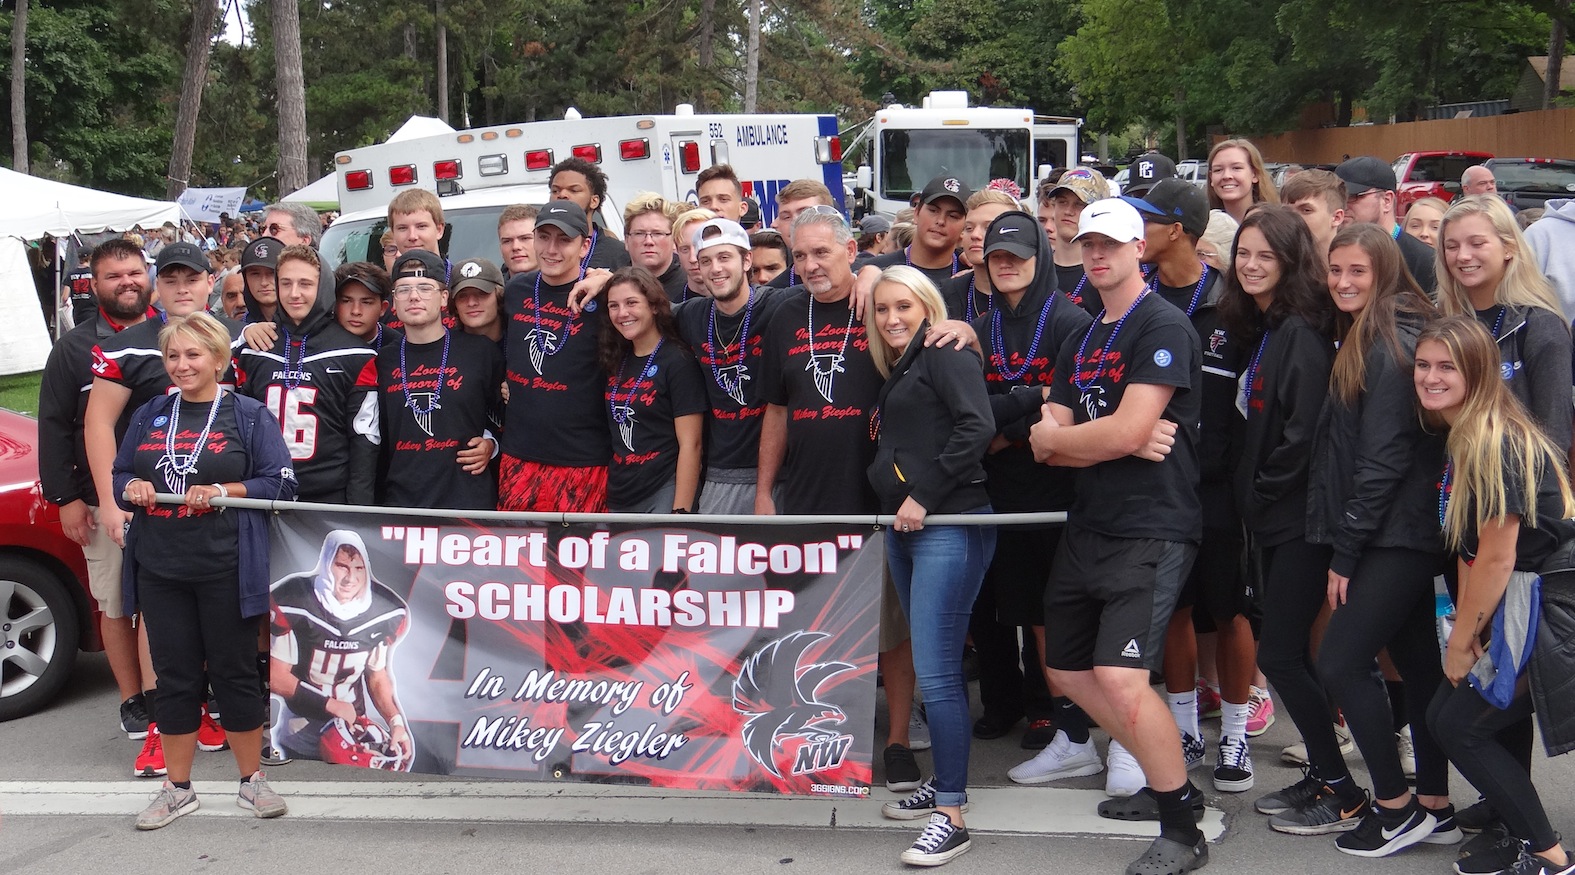 Pictured are the walkers who showed up to honor Michael Ziegler and the `Heart of a Falcon` Scholarship. (Photo by Lorna Tilley-Peltier)